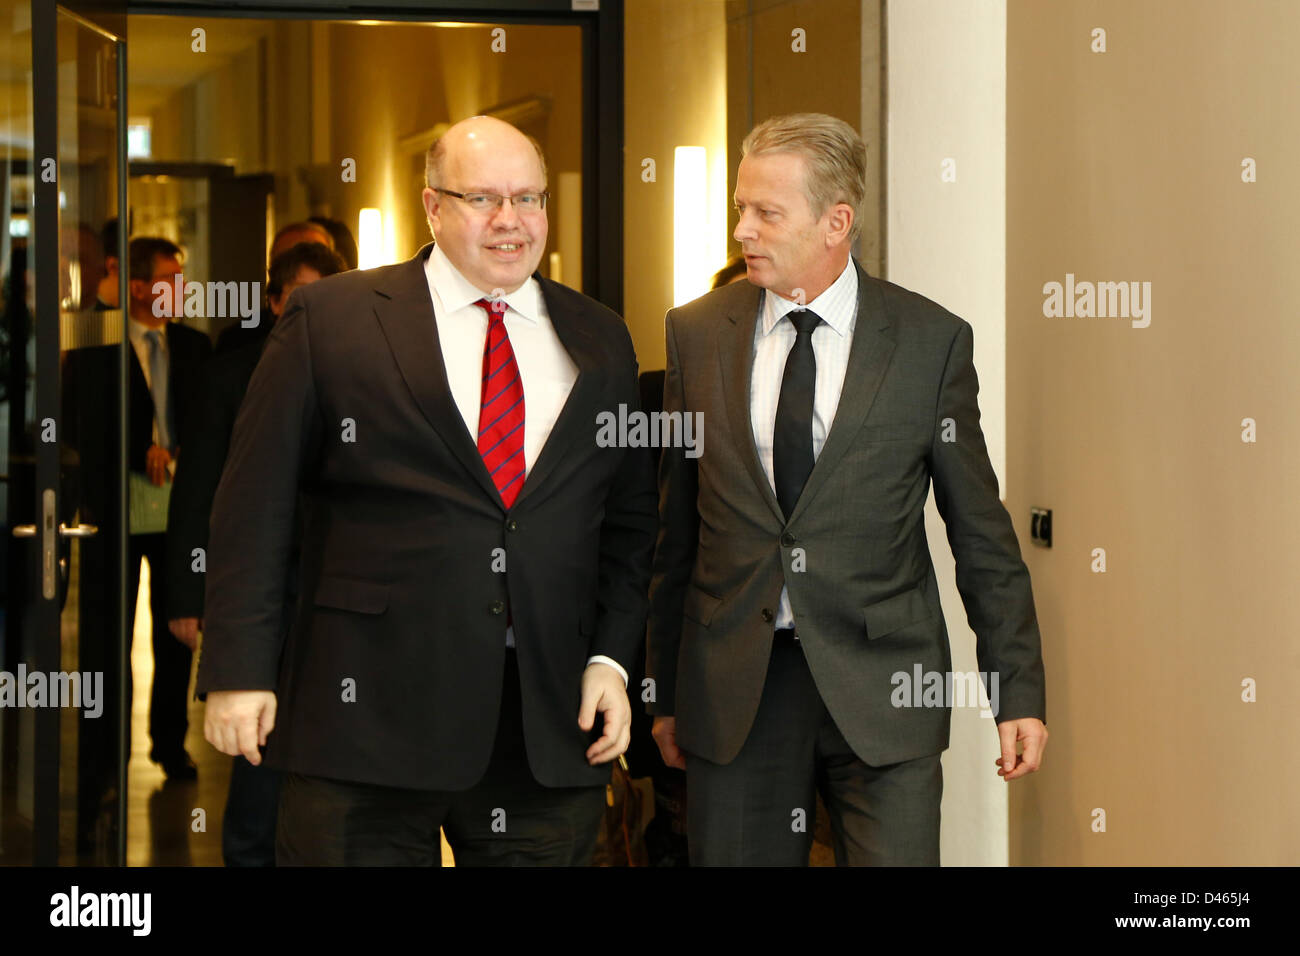 Berlin, Germany. 6th March 2013. Federal Environment Minister Peter Altmaier meets Austrian Economy Minister Reinhold Mitterlehner at the Federal Environment Ministry in Berlin. On picture: Peter Altmaier (CDU), Federal Minister of Environment, and the Austrian Economy Minister Reinhold Mitterlehner at BMU in Berlin. Credit:  Reynaldo Chaib Paganelli / Alamy Live News Stock Photo